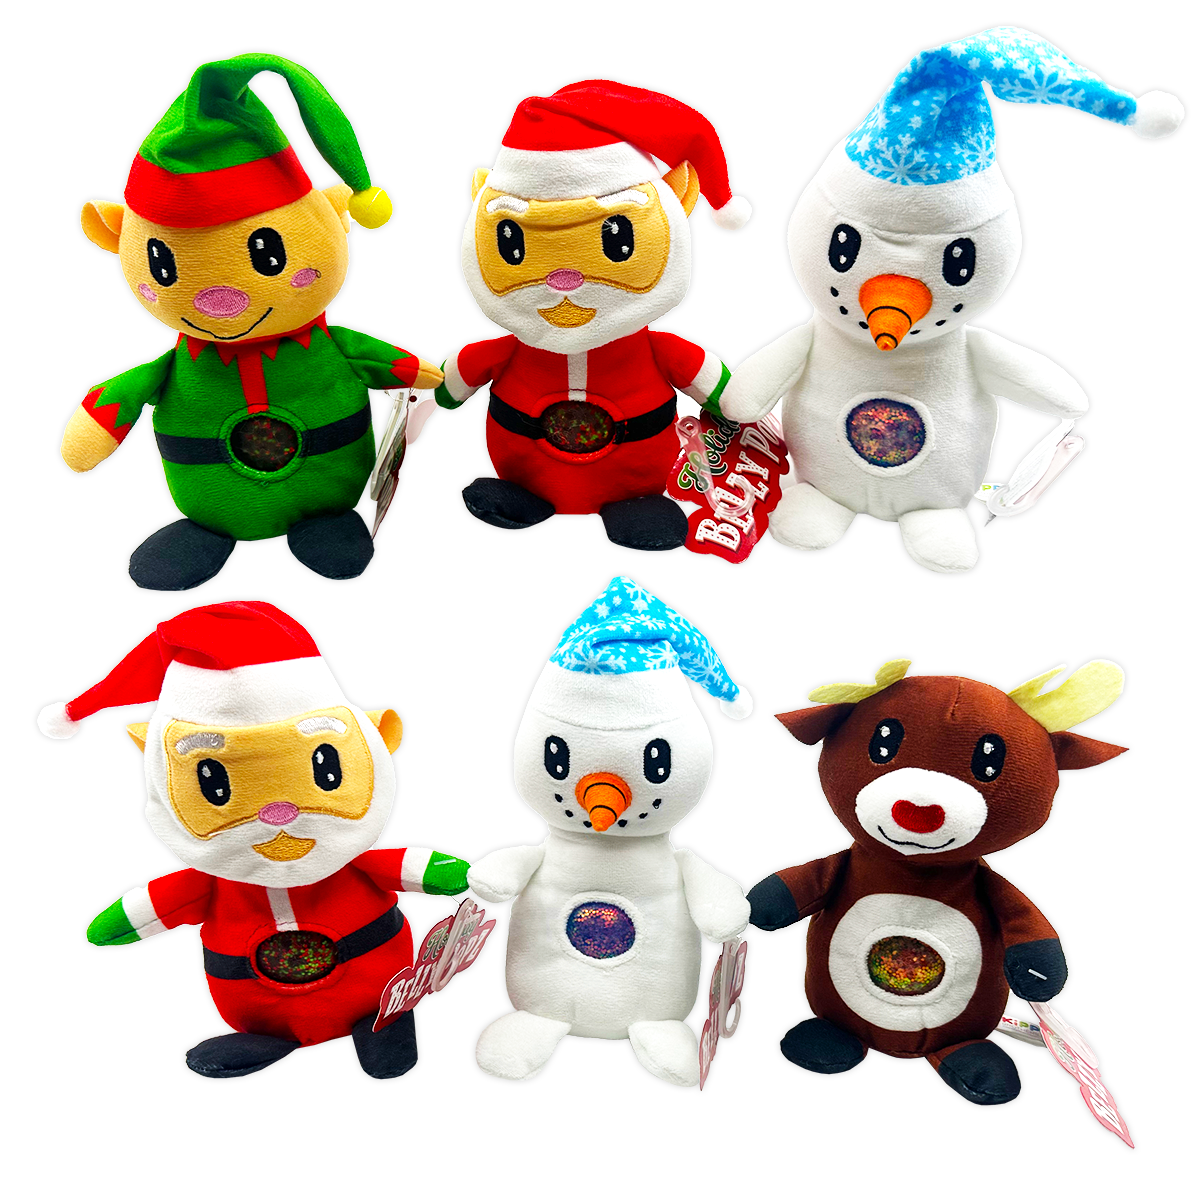 ITEM NUMBER 024200 HOLIDAY BELLY POPZ PLUSH TOY 6 PIECES PER DISPLAY